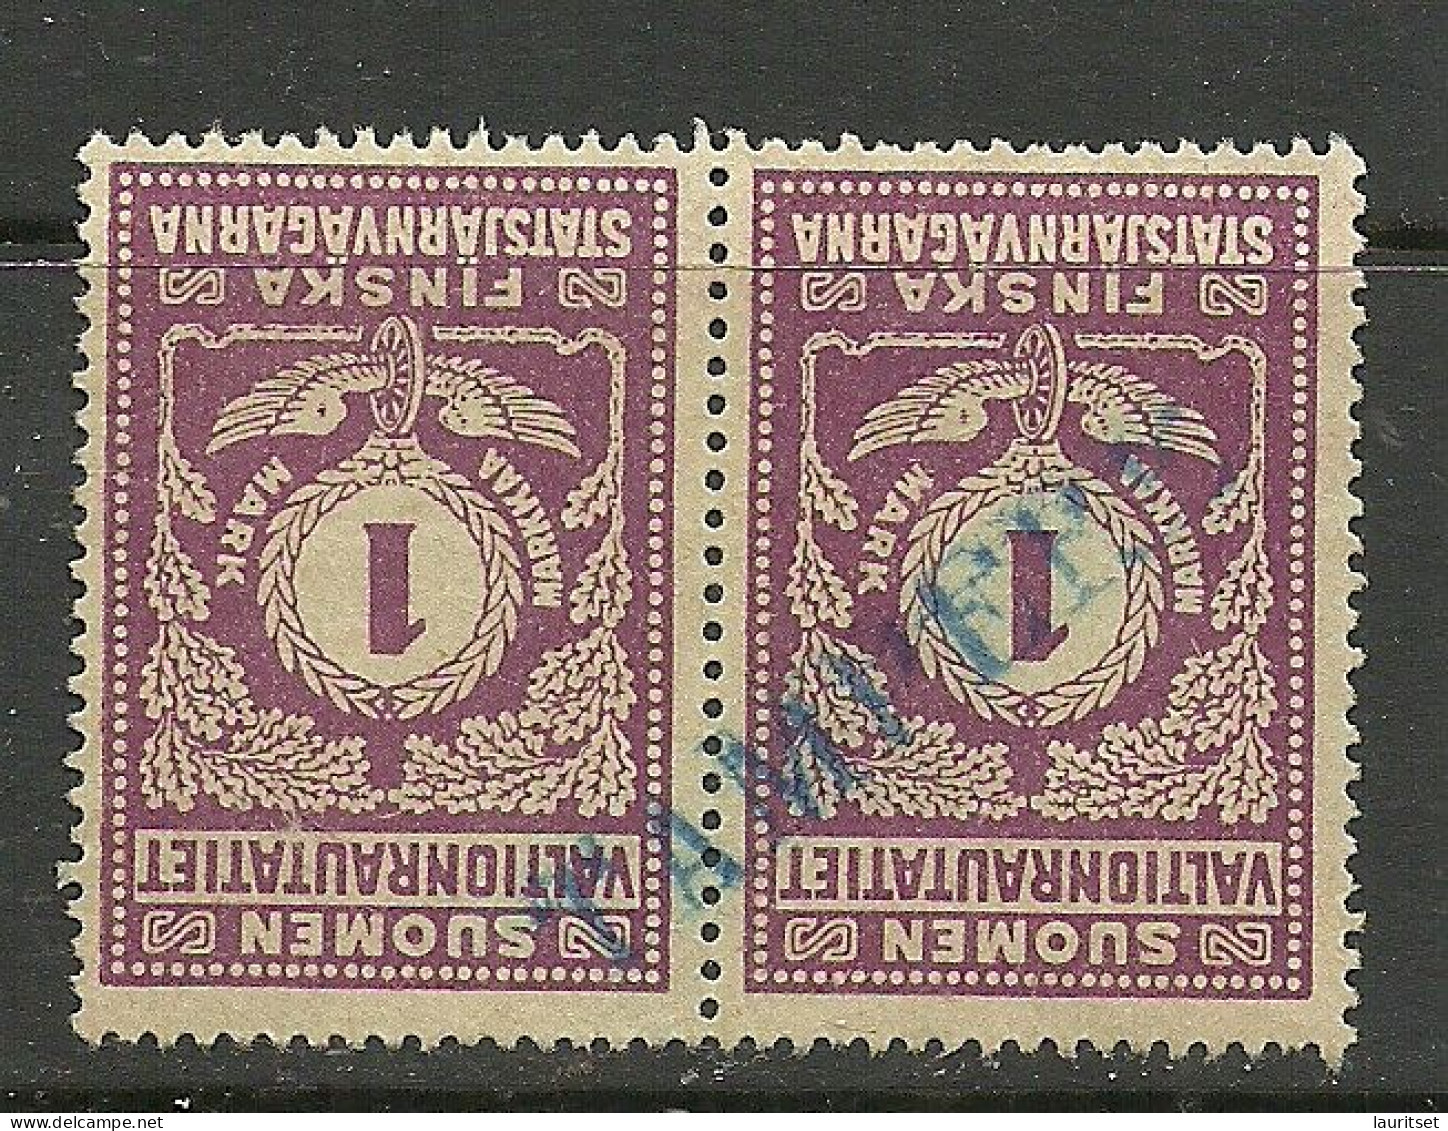 FINLAND FINNLAND 1920/1921 Railway Stamps State Railway 1 MK As Pair Tampere - Colis Postaux